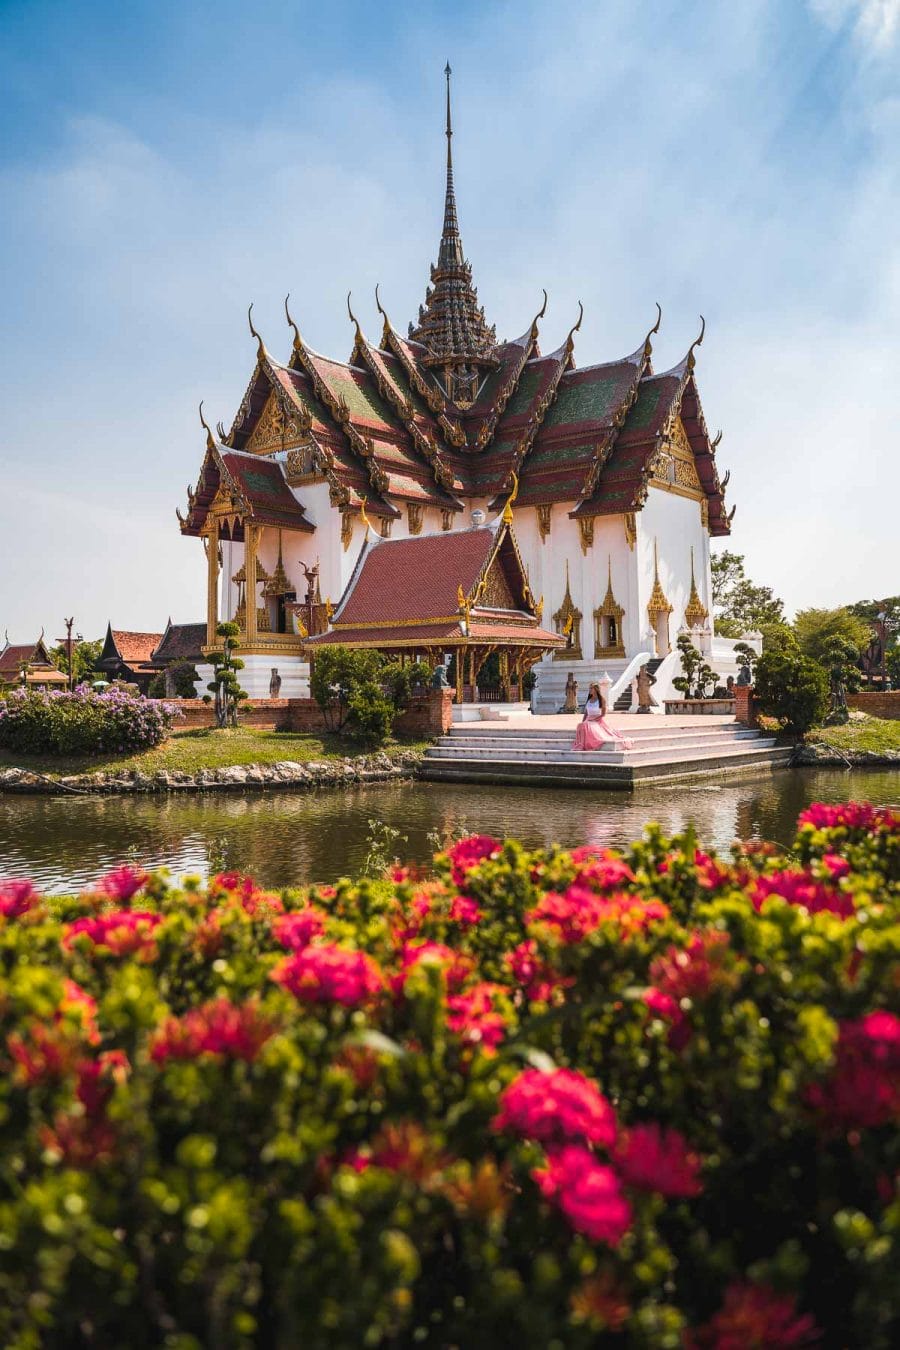 Beautiful temple with flowers in the foreground at the Ancient Siam Bangkok